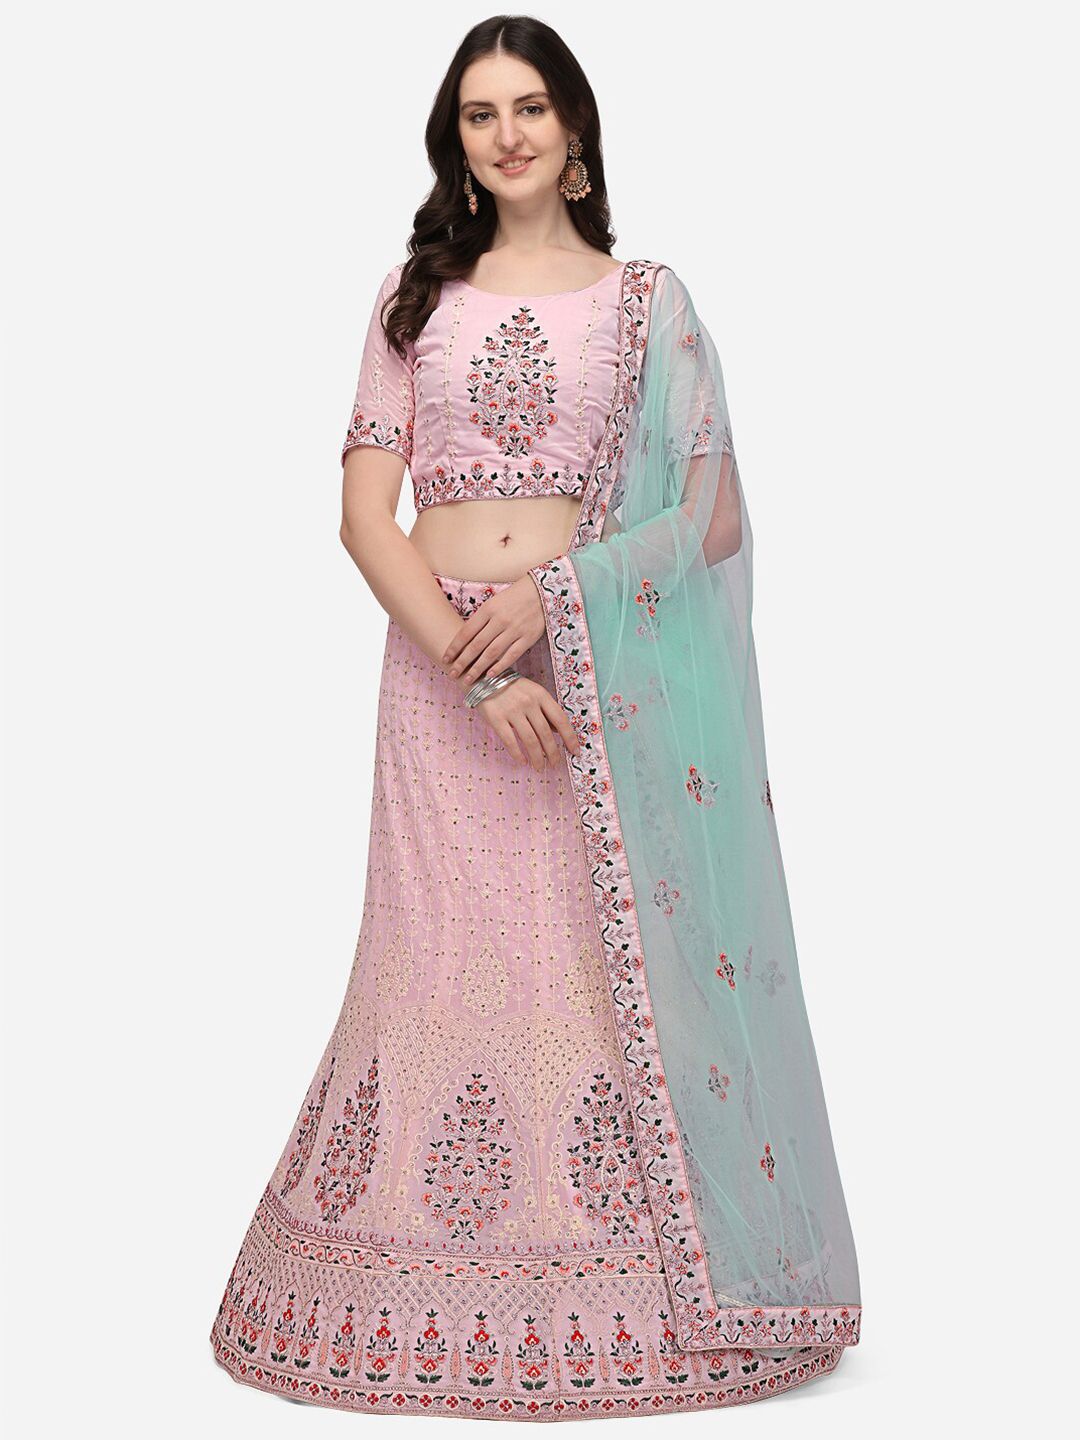 VRSALES Pink & Blue Embroidered Semi-Stitched Lehenga & Unstitched Blouse With Dupatta Price in India